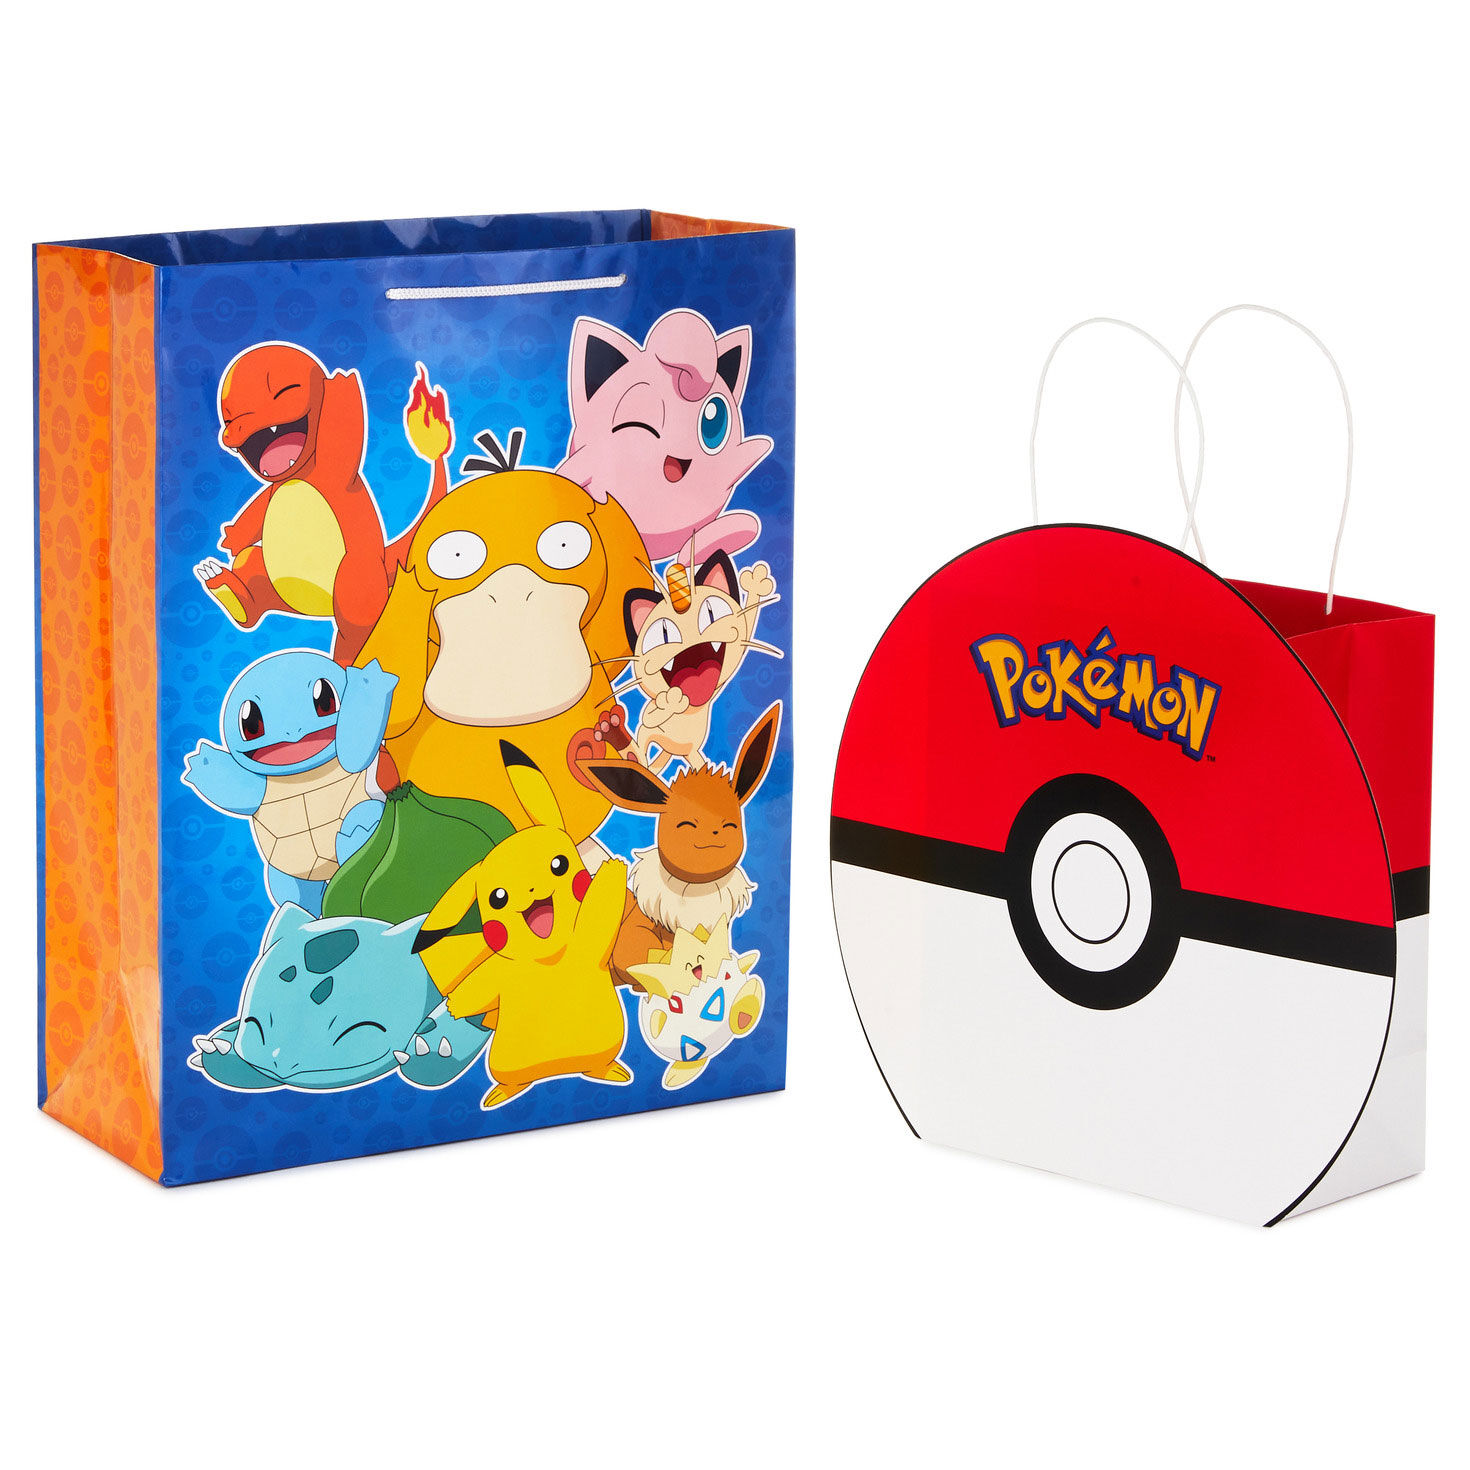 Pokémon and Poke Ball Gift Bags, Assorted Sizes for only USD 8.99 | Hallmark